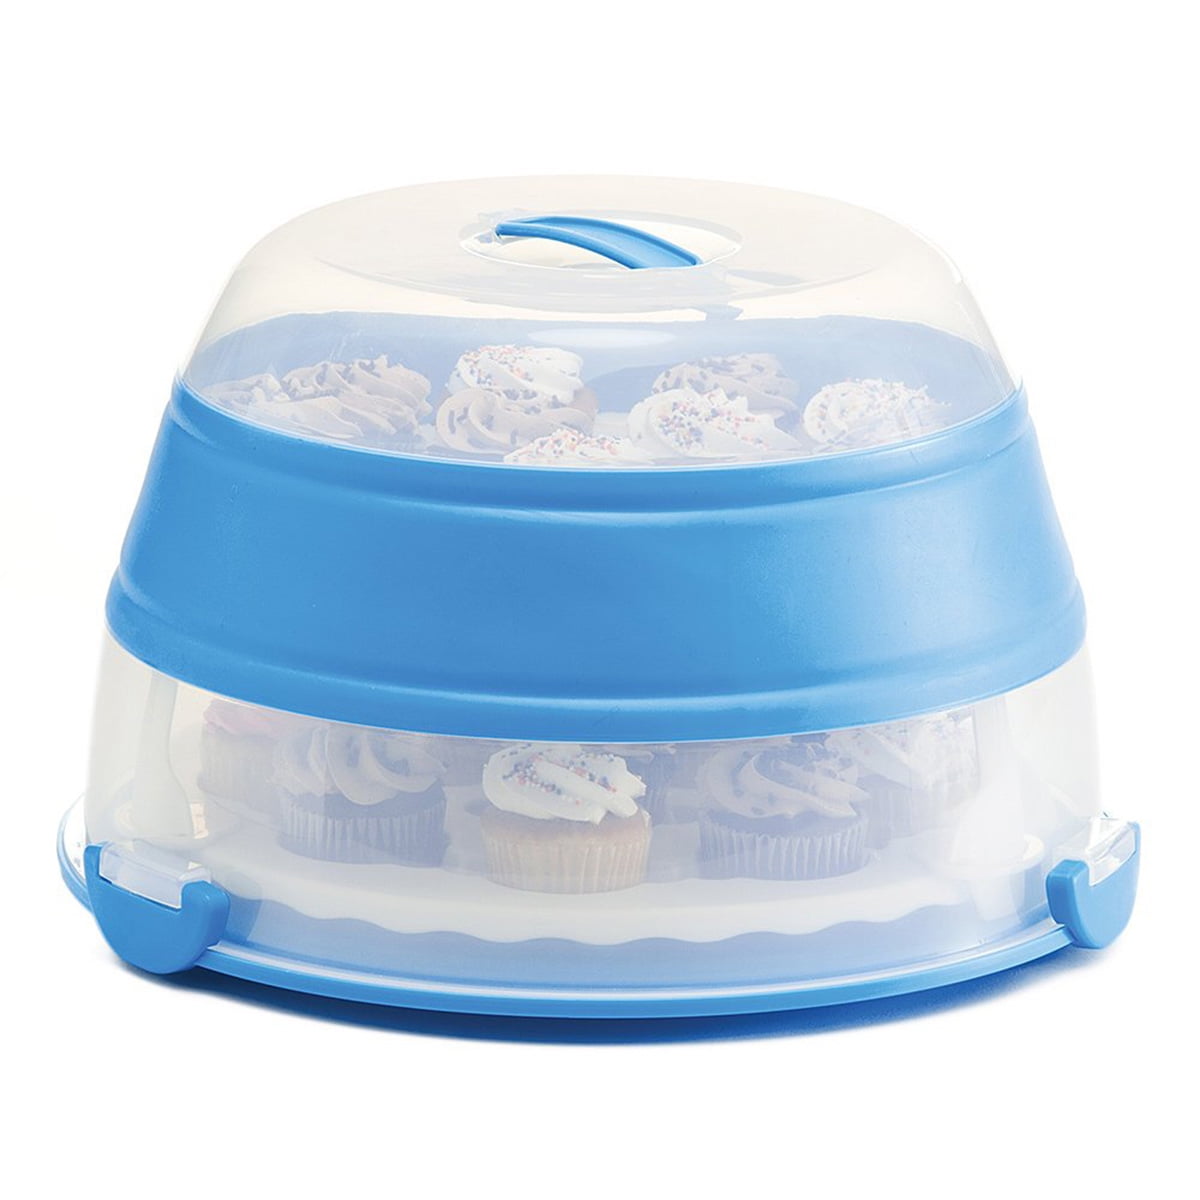 Cake Carrier Storage Container with Lid and Handle, Round Cupcake Keeper Cheesecake Holder for Transport Cakes, Pies, Desserts, Size: Fits 9” Diameter